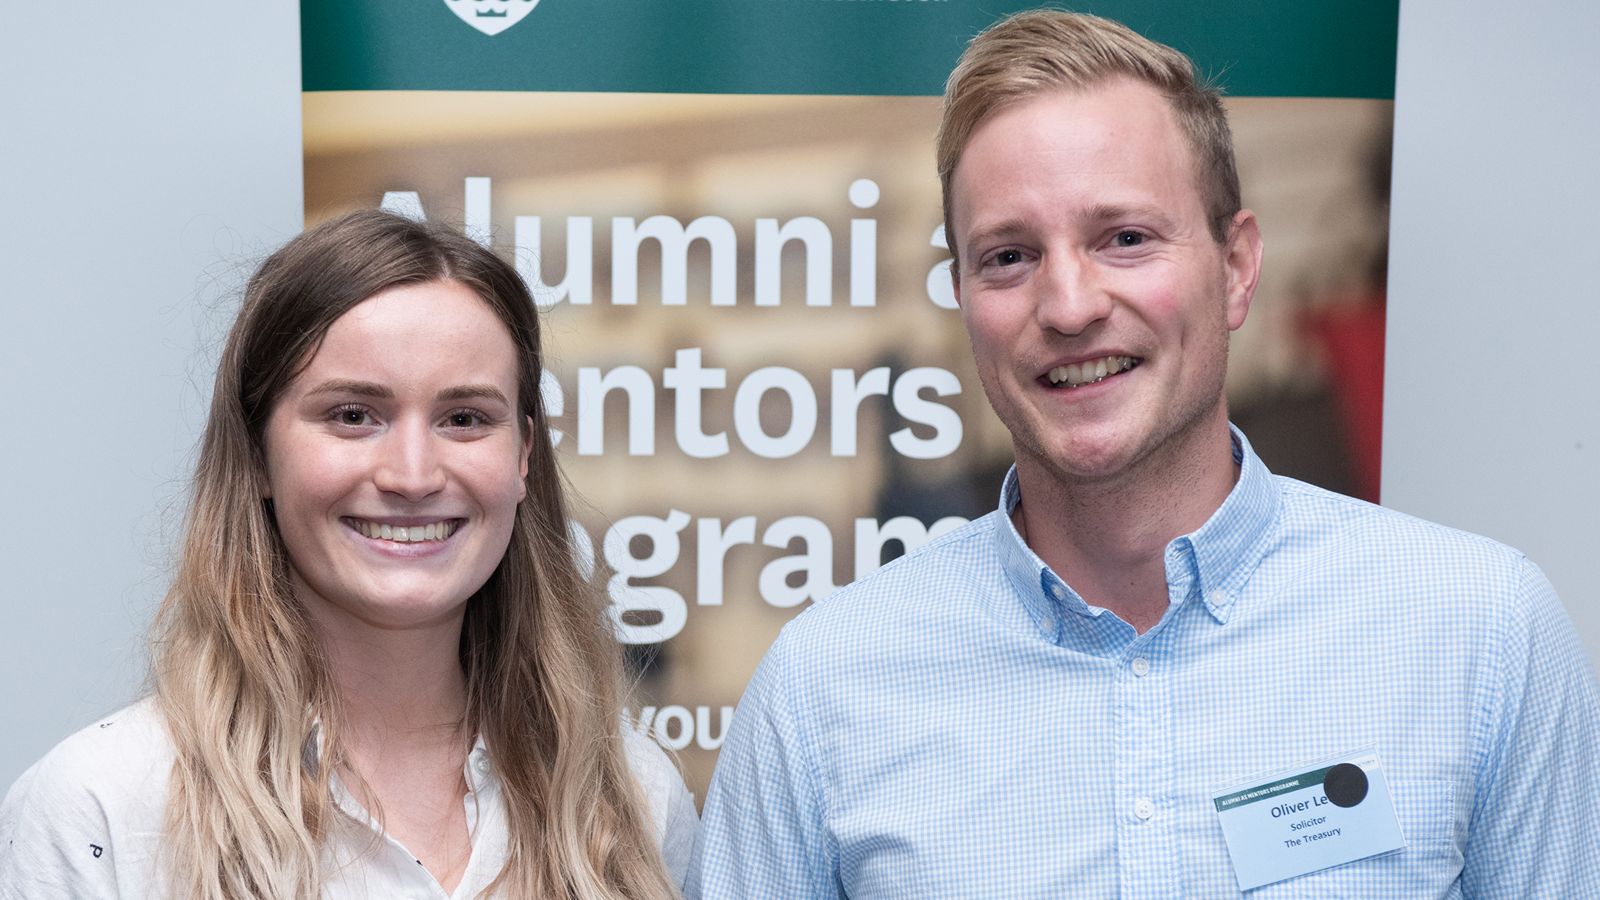 Richard London and Cara Askew working together as part of the Alumni as Mentors programme